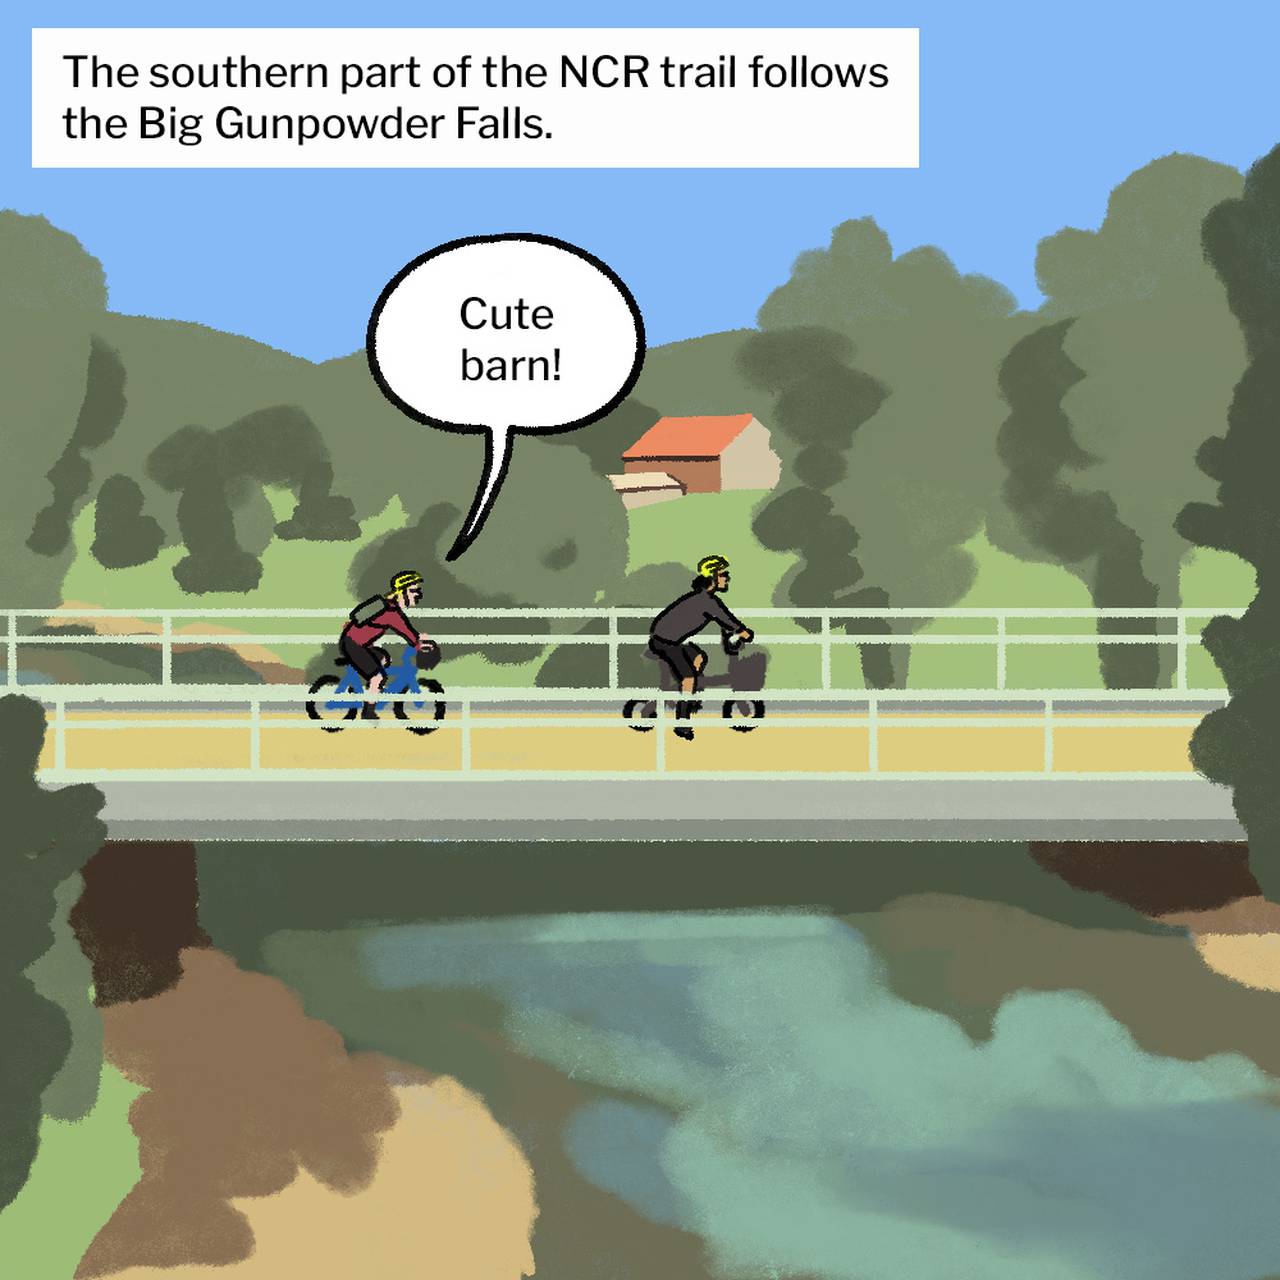 Illustration of woman and man biking on bridge across a stream, with trees, hills and a barn with a red roof in the background. The southern part of the NCR trail follows the Big Gunpowder Falls. The woman says: "Cute barn!"